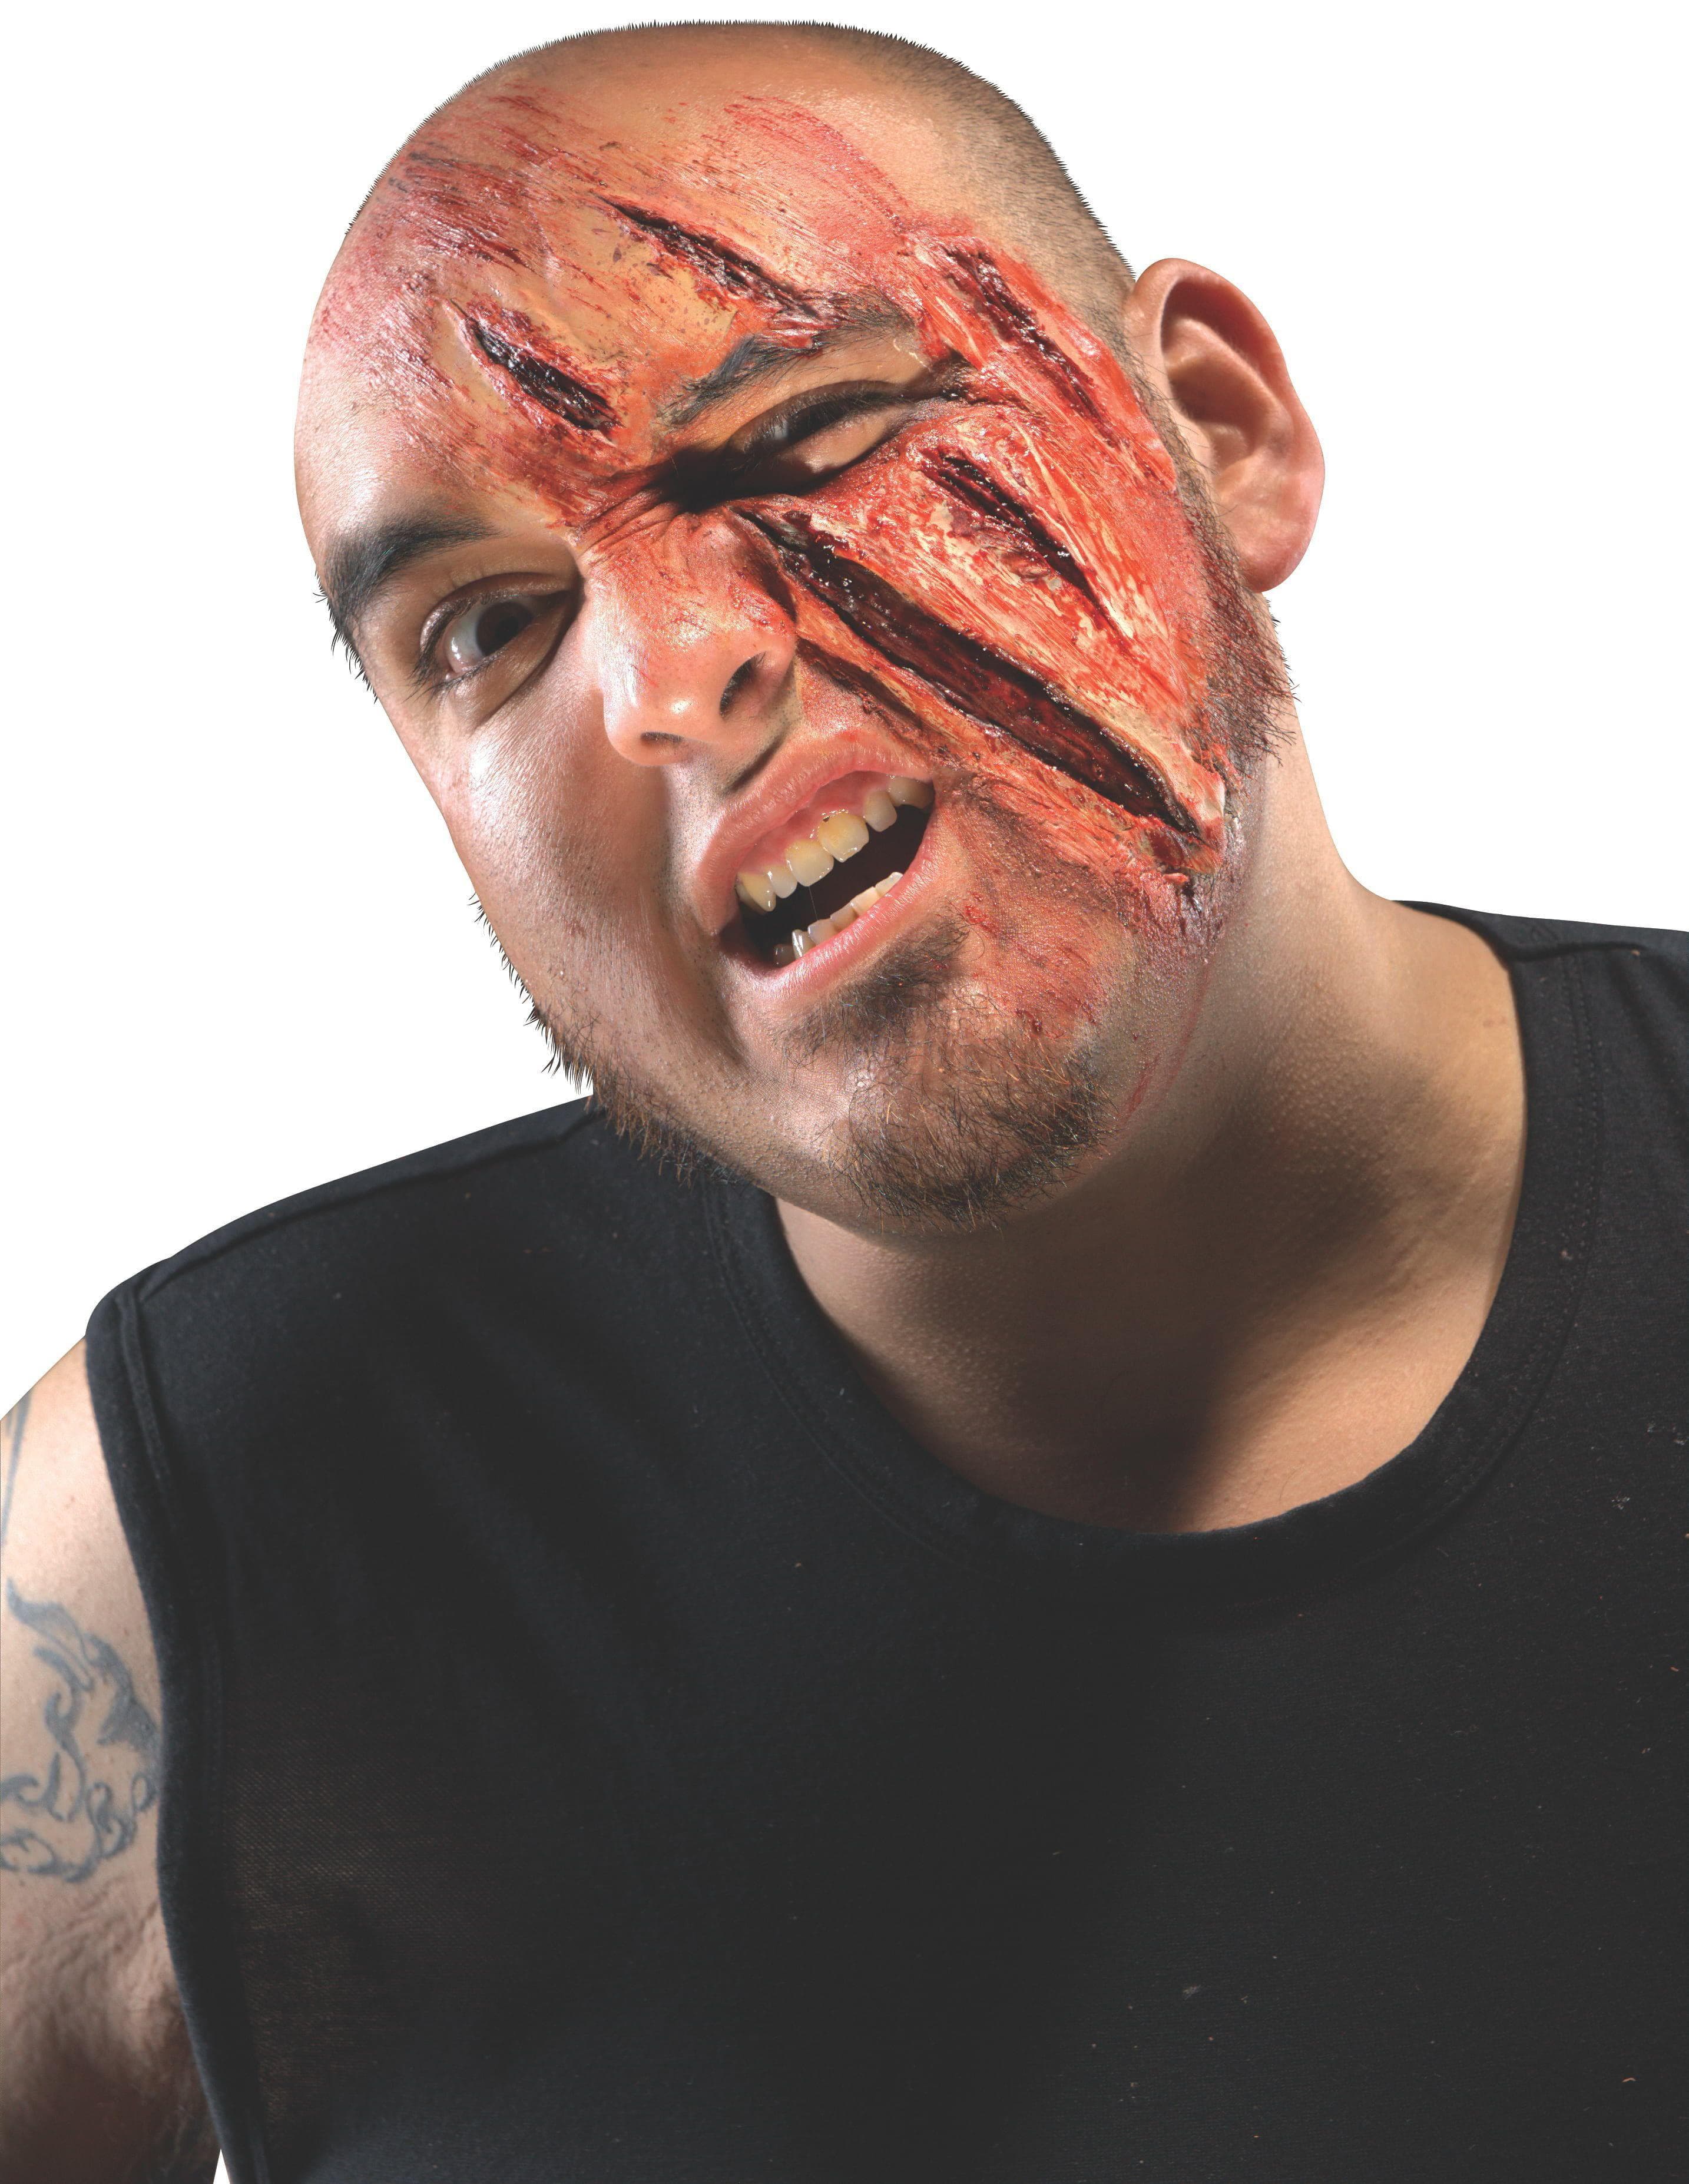 Clawed Theatrical Effects Makeup - costumes.com